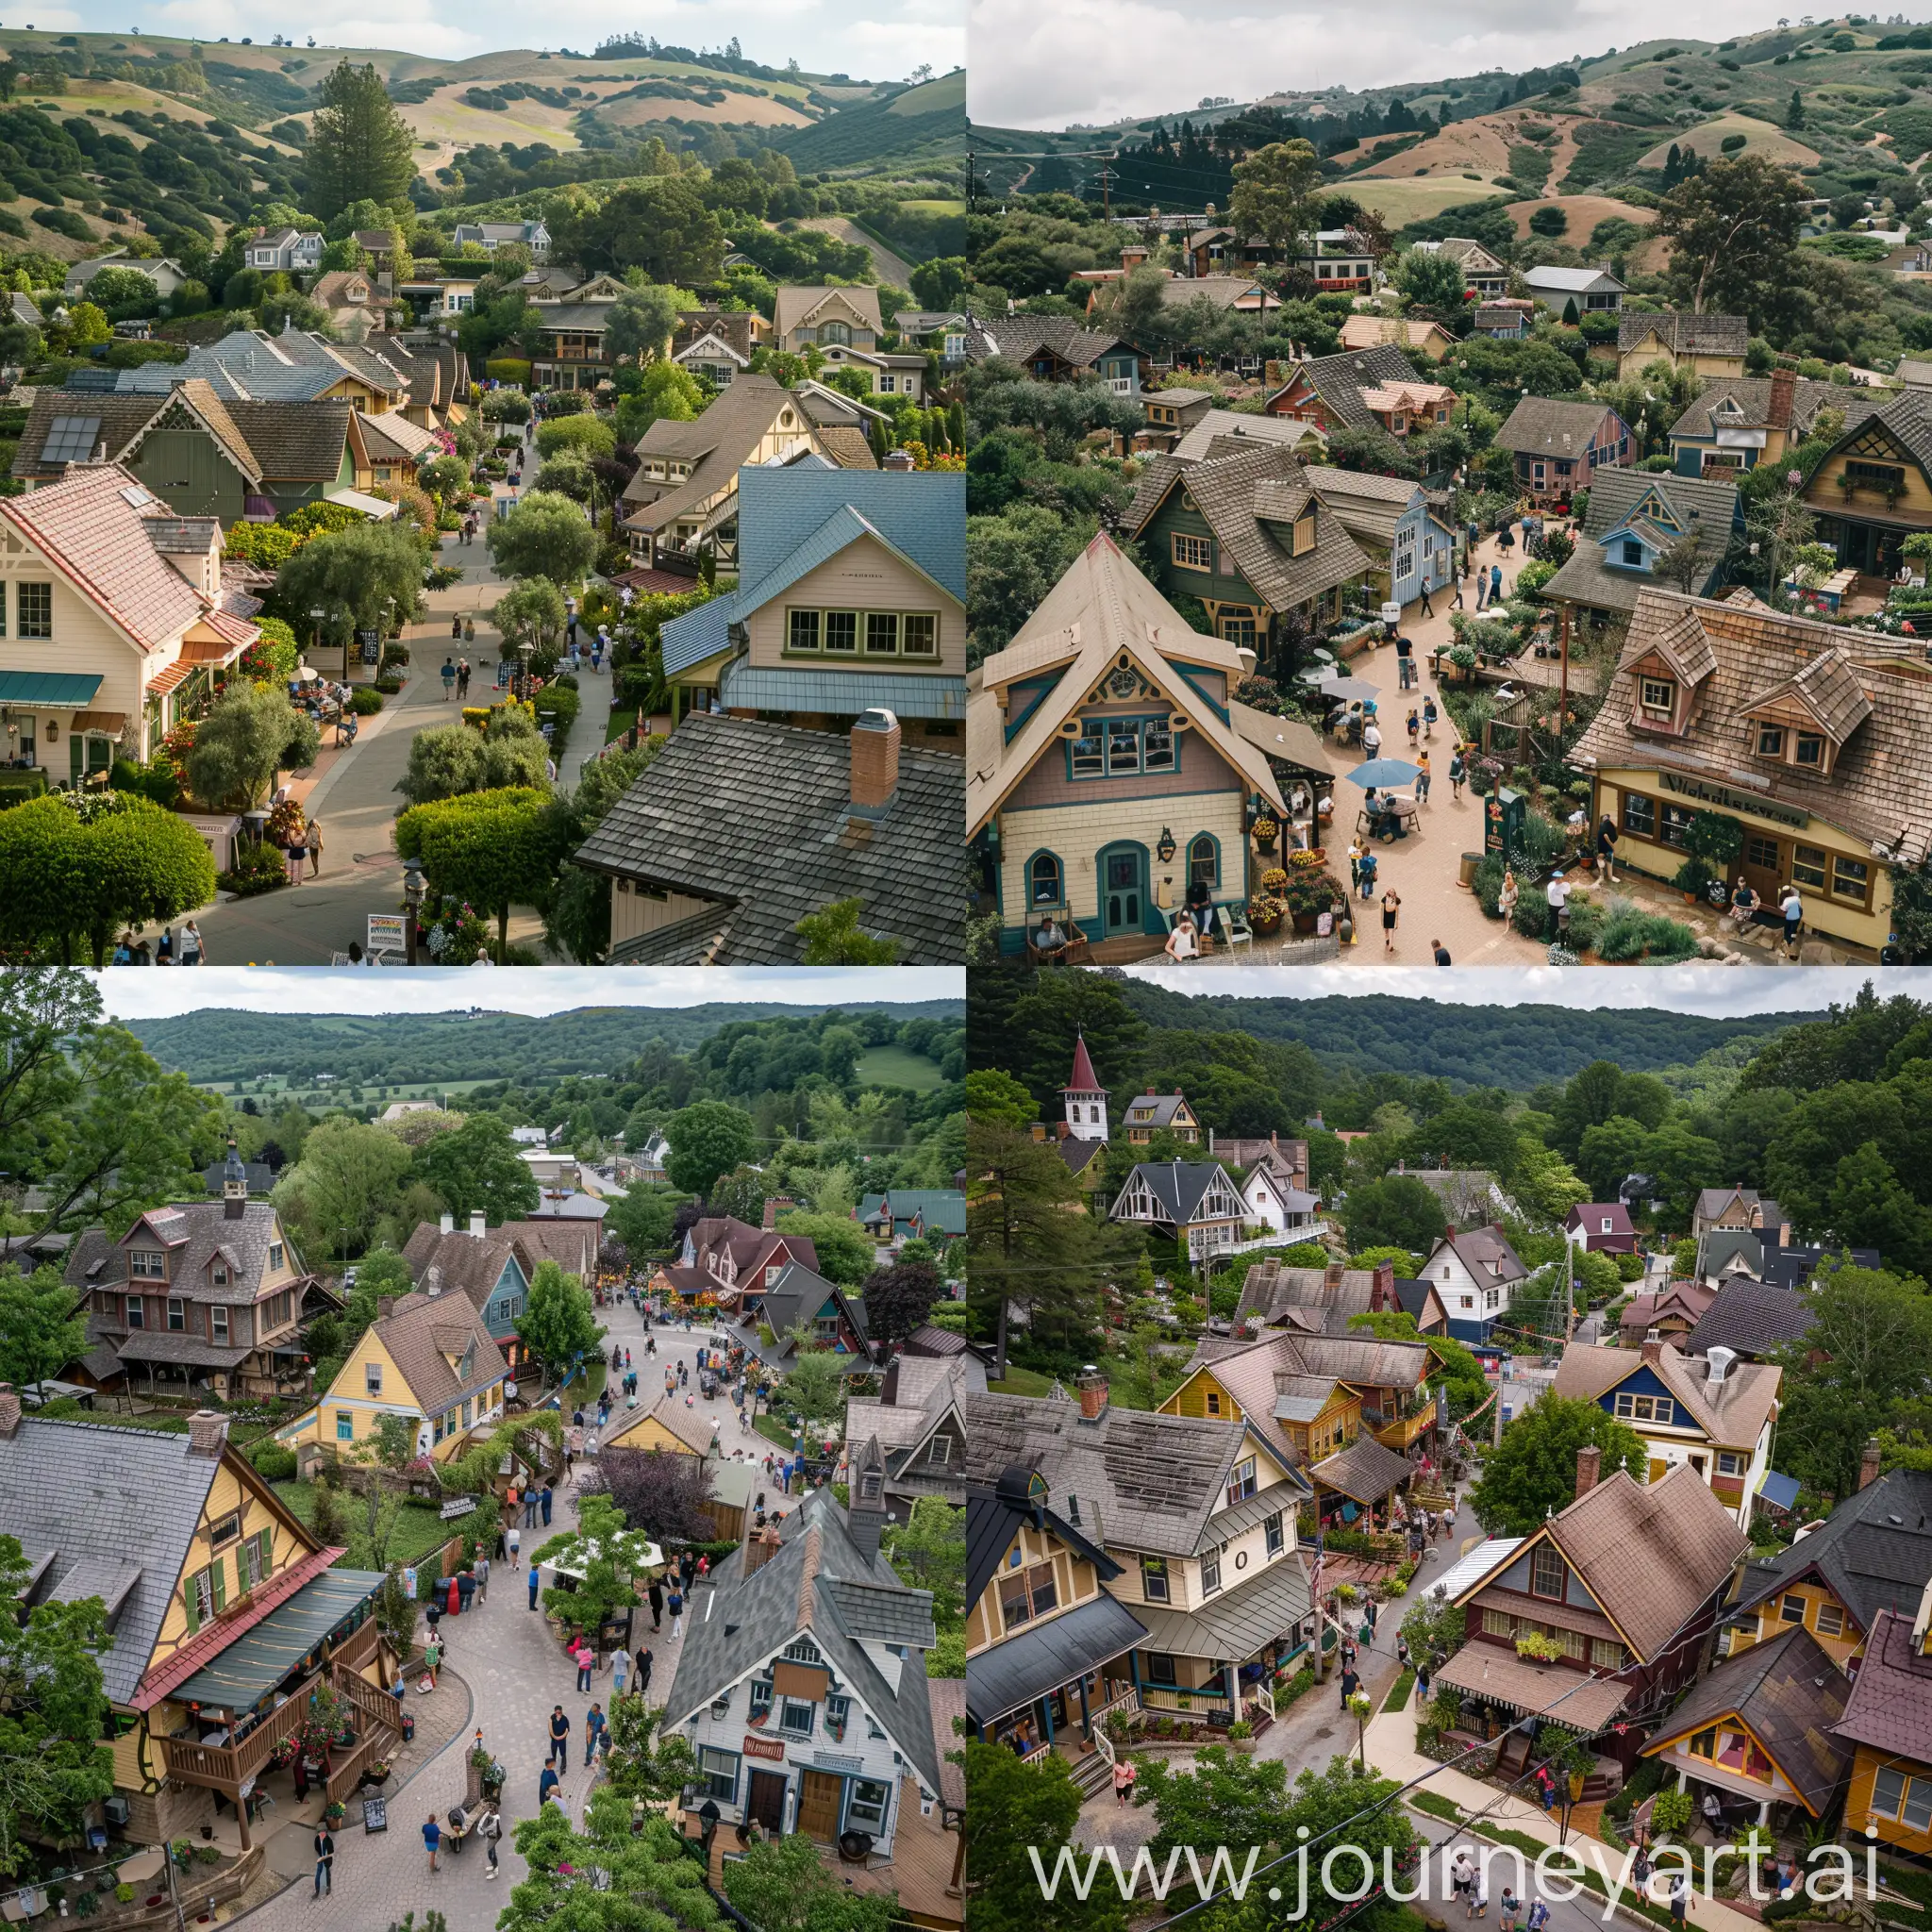 An aerial view captures the charming town of Willowbrook, nestled among rolling hills and lush greenery. Cozy little houses with colorful roofs, quaint streets, and smiling townspeople dot the landscape below. Serene atmosphere, vibrant colors, establishing location, showcasing the town's beauty, a sense of community, Canon 5D Mark IV, 24-70mm lens, f5.6